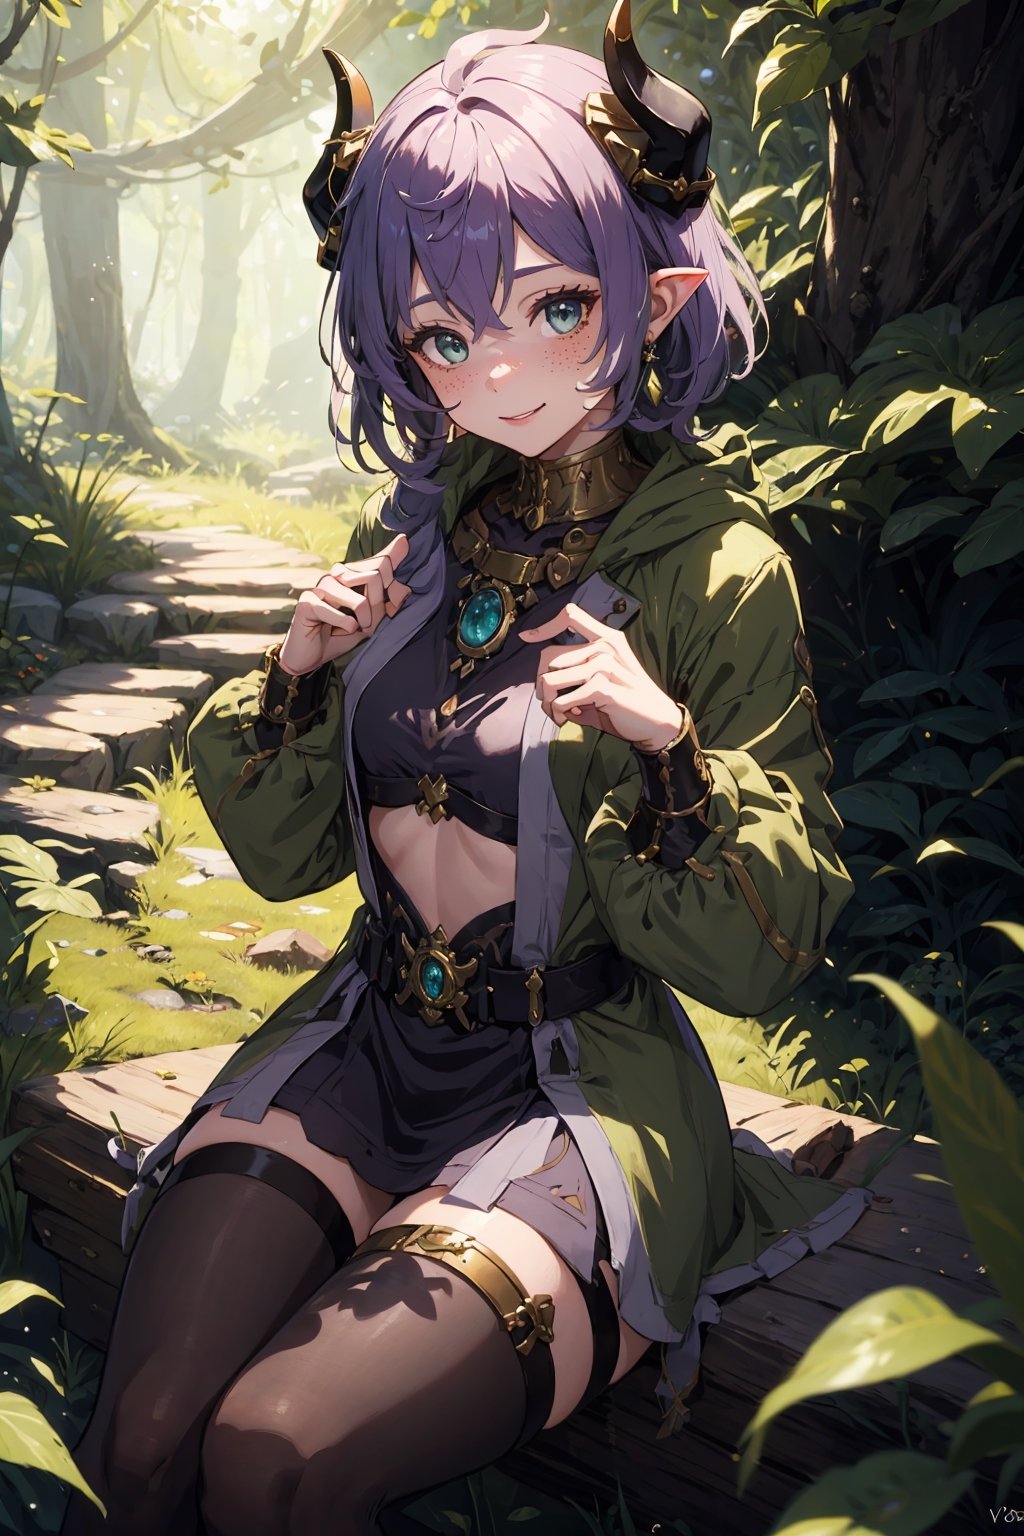 Imagine a female child with short messy vibrant purple hair in a short hair cut. She has small breasts. She has bright green eyes. She has pointed elf ears. She has two short horns on her head. She has an evil smile on her face that shows she's up to no good. She has warm freckles on her face. She wears pants, a full shirt, and a long green trench coat. The background is a charming forest path in the enchanted woods with bright lighting, creating a magical ambiance. This artwork captures the essence of mischief and magic against the backdrop of a beautiful setting. detailed, detail_eyes, detailed_hair, detailed_scenario, detailed_hands, detailed_background, vox machina style,vox machina style,oil impasto, flat chest.,,niloudef